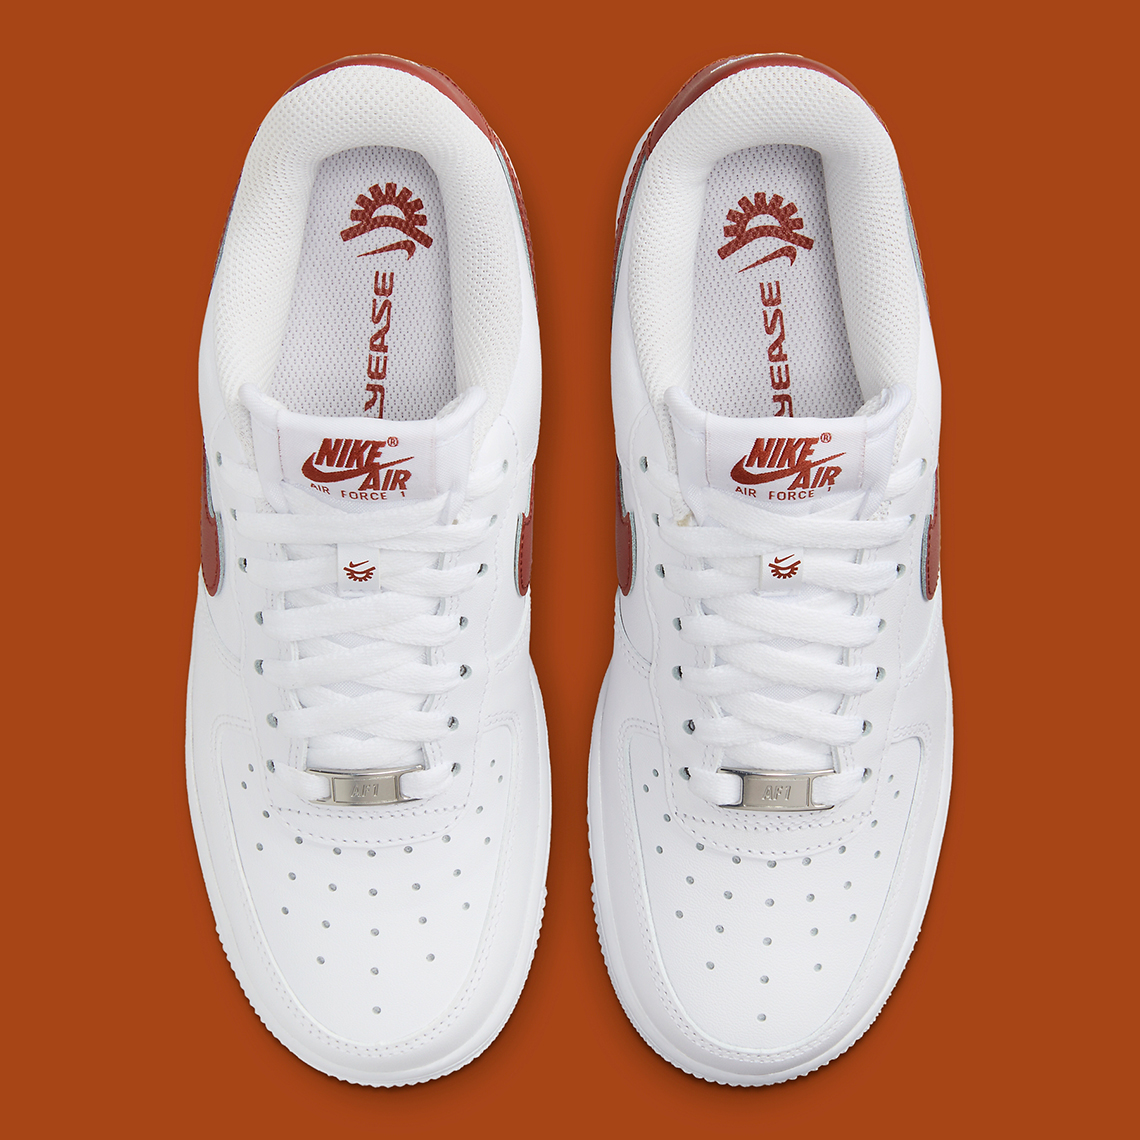 nike air force 1 low flyease white rugged orange dx5883 102 2